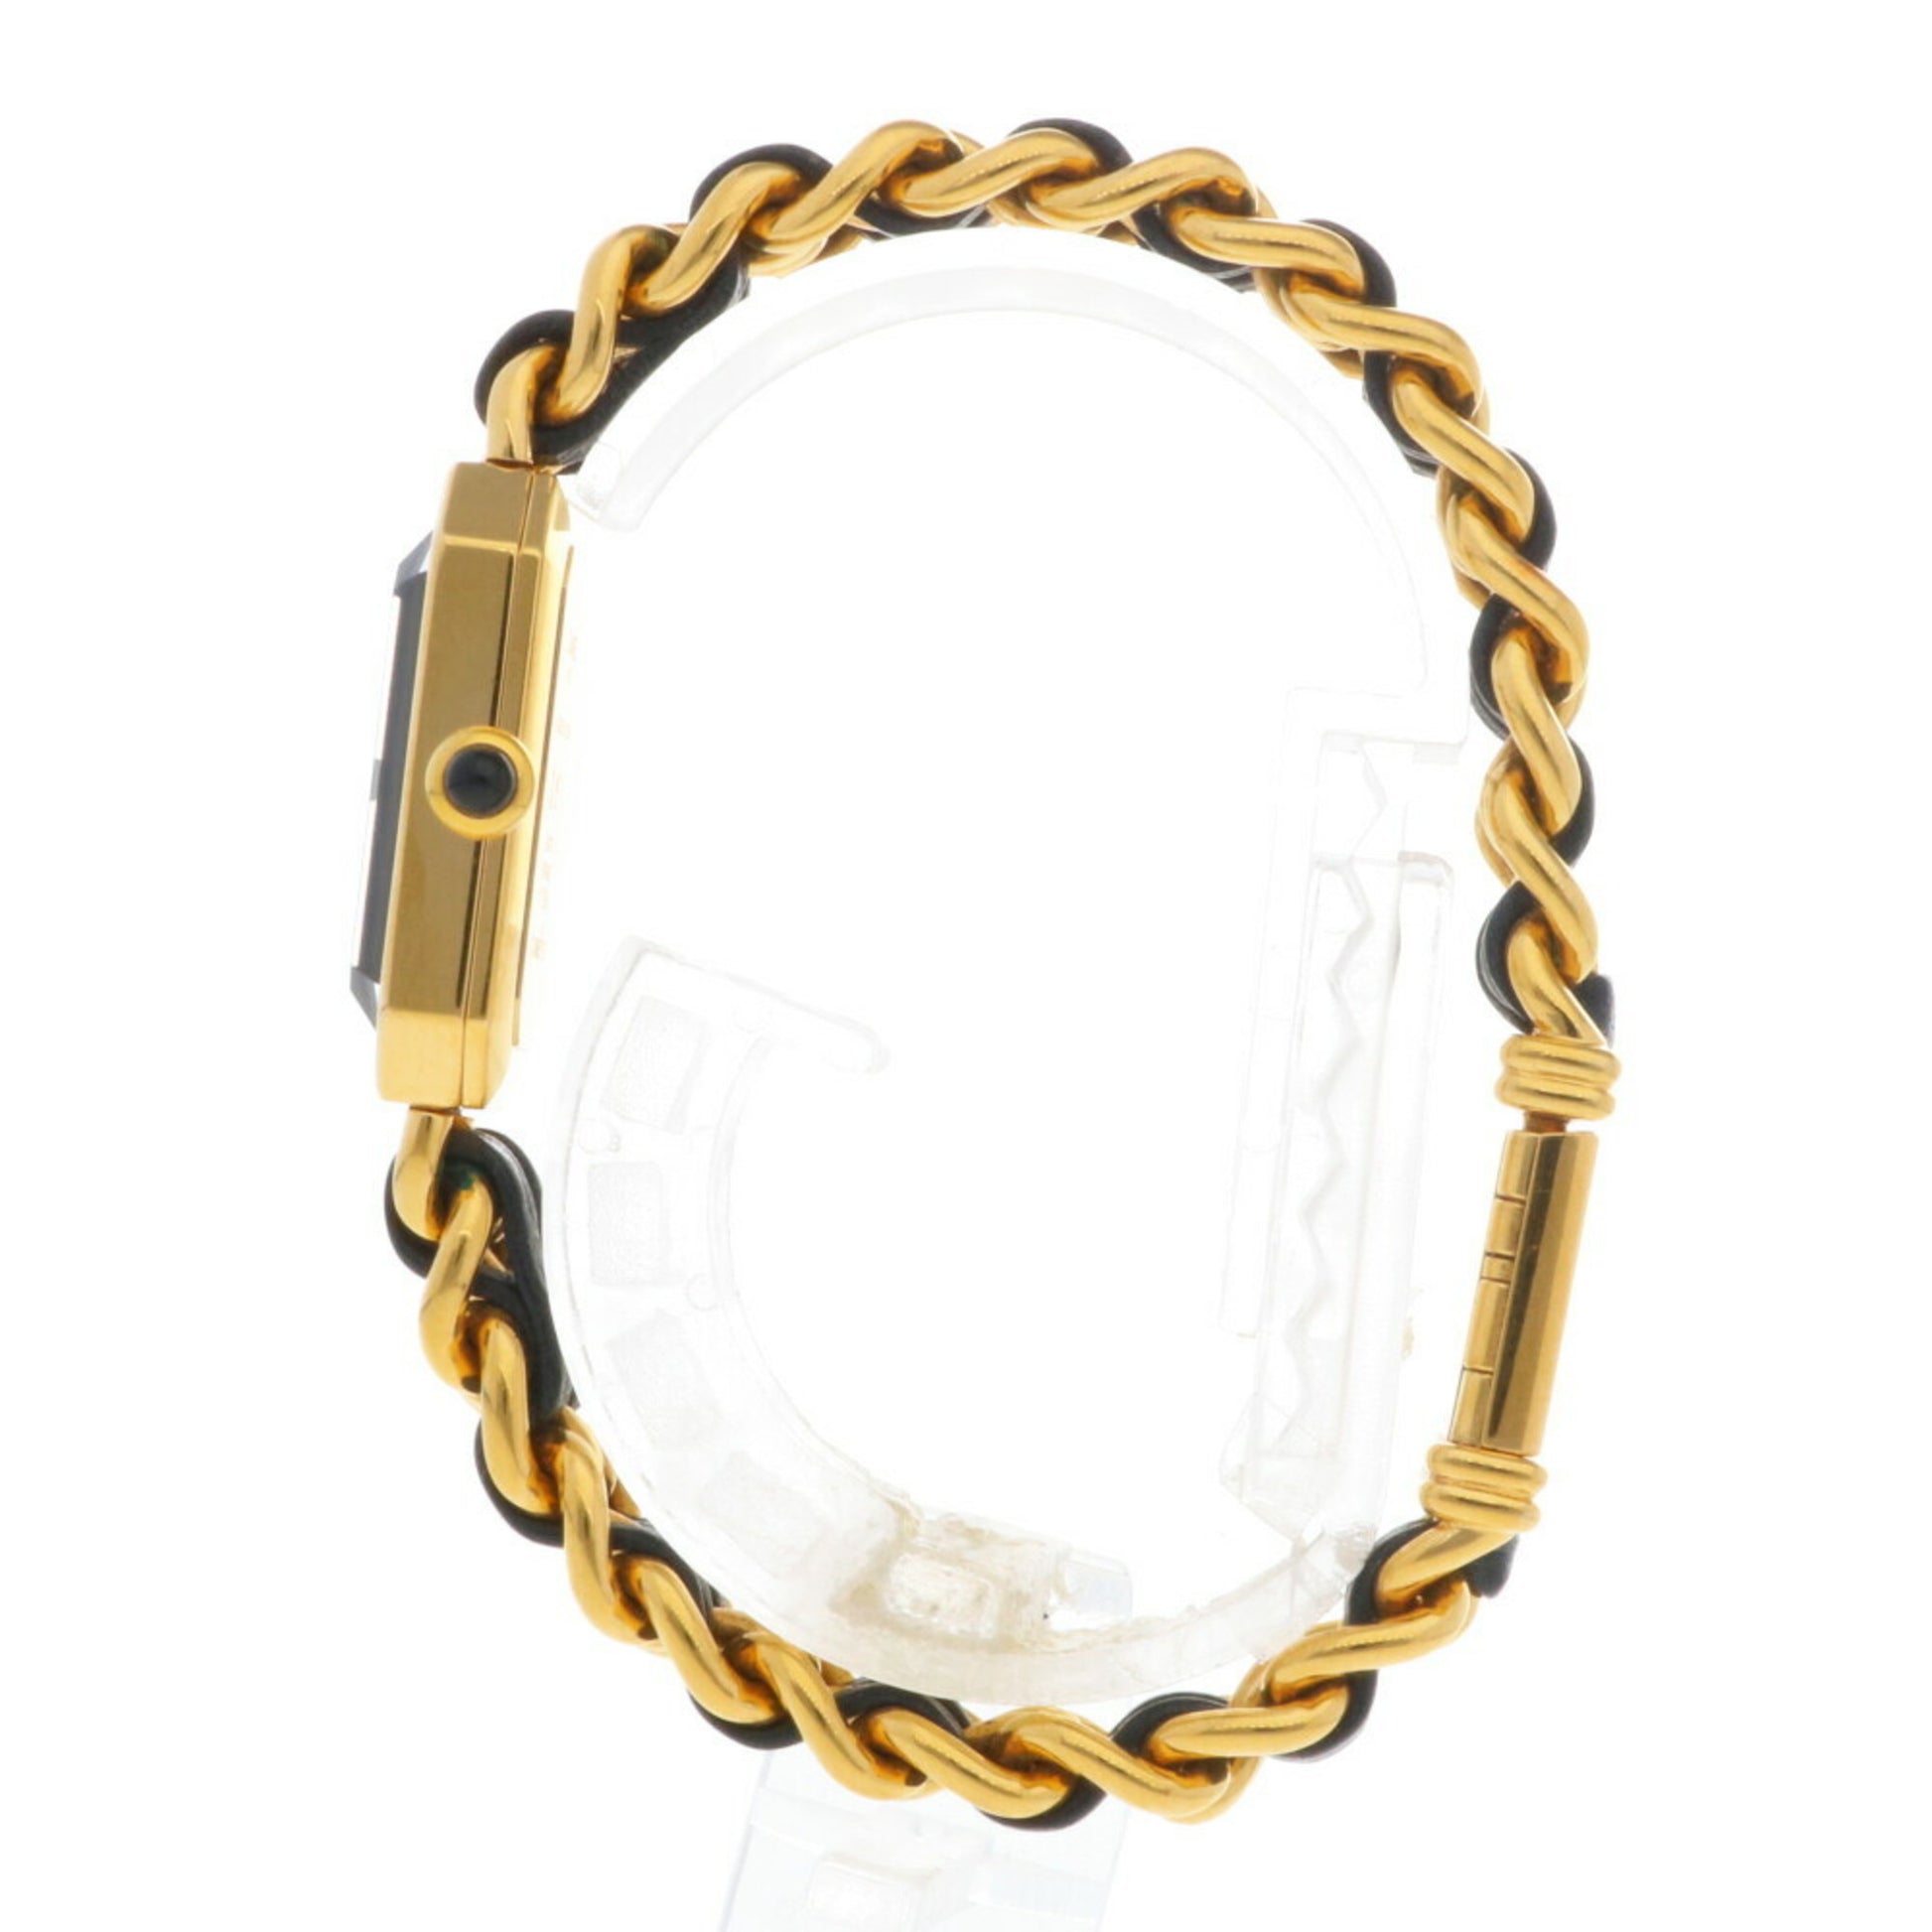 Première chaîne yellow gold watch Chanel Gold in Yellow gold - 23676924